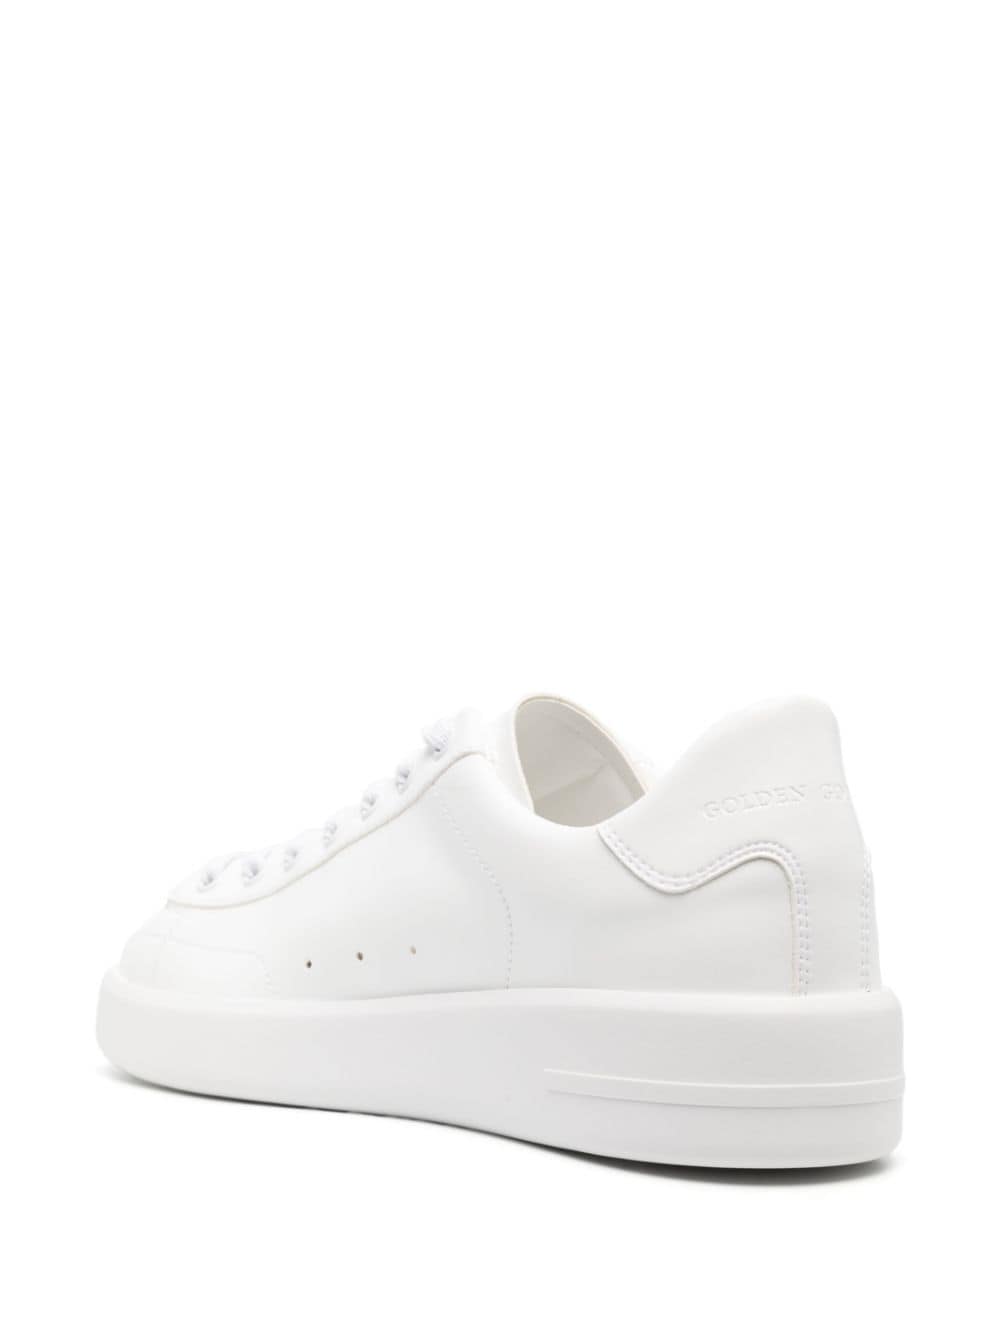 GOLDEN GOOSE PURE STAR LEATHER Sneaker